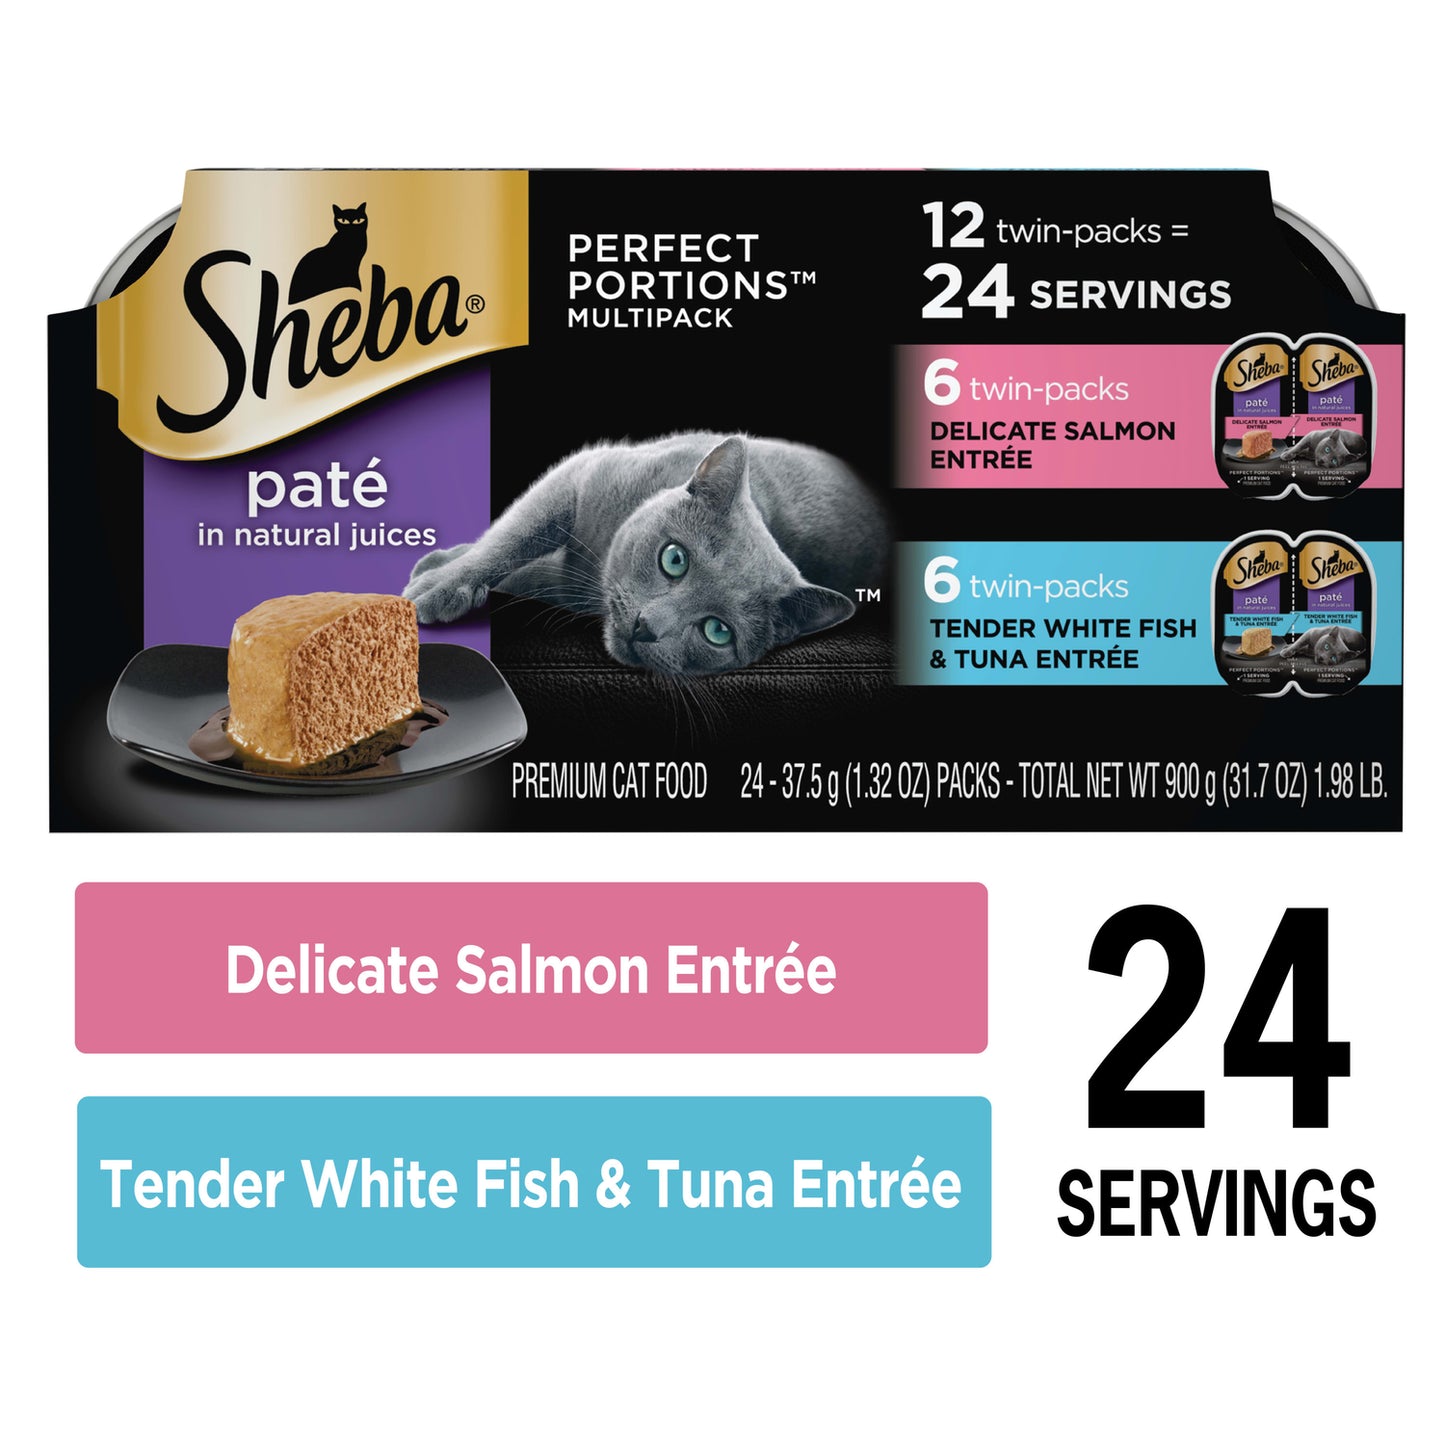 SHEBA Wet Cat Food Pate Variety Pack, Delicate Salmon and Tender Whitefish & Tuna Entrees, 2.6 Oz. PERFECT PORTIONS Twin Pack Trays